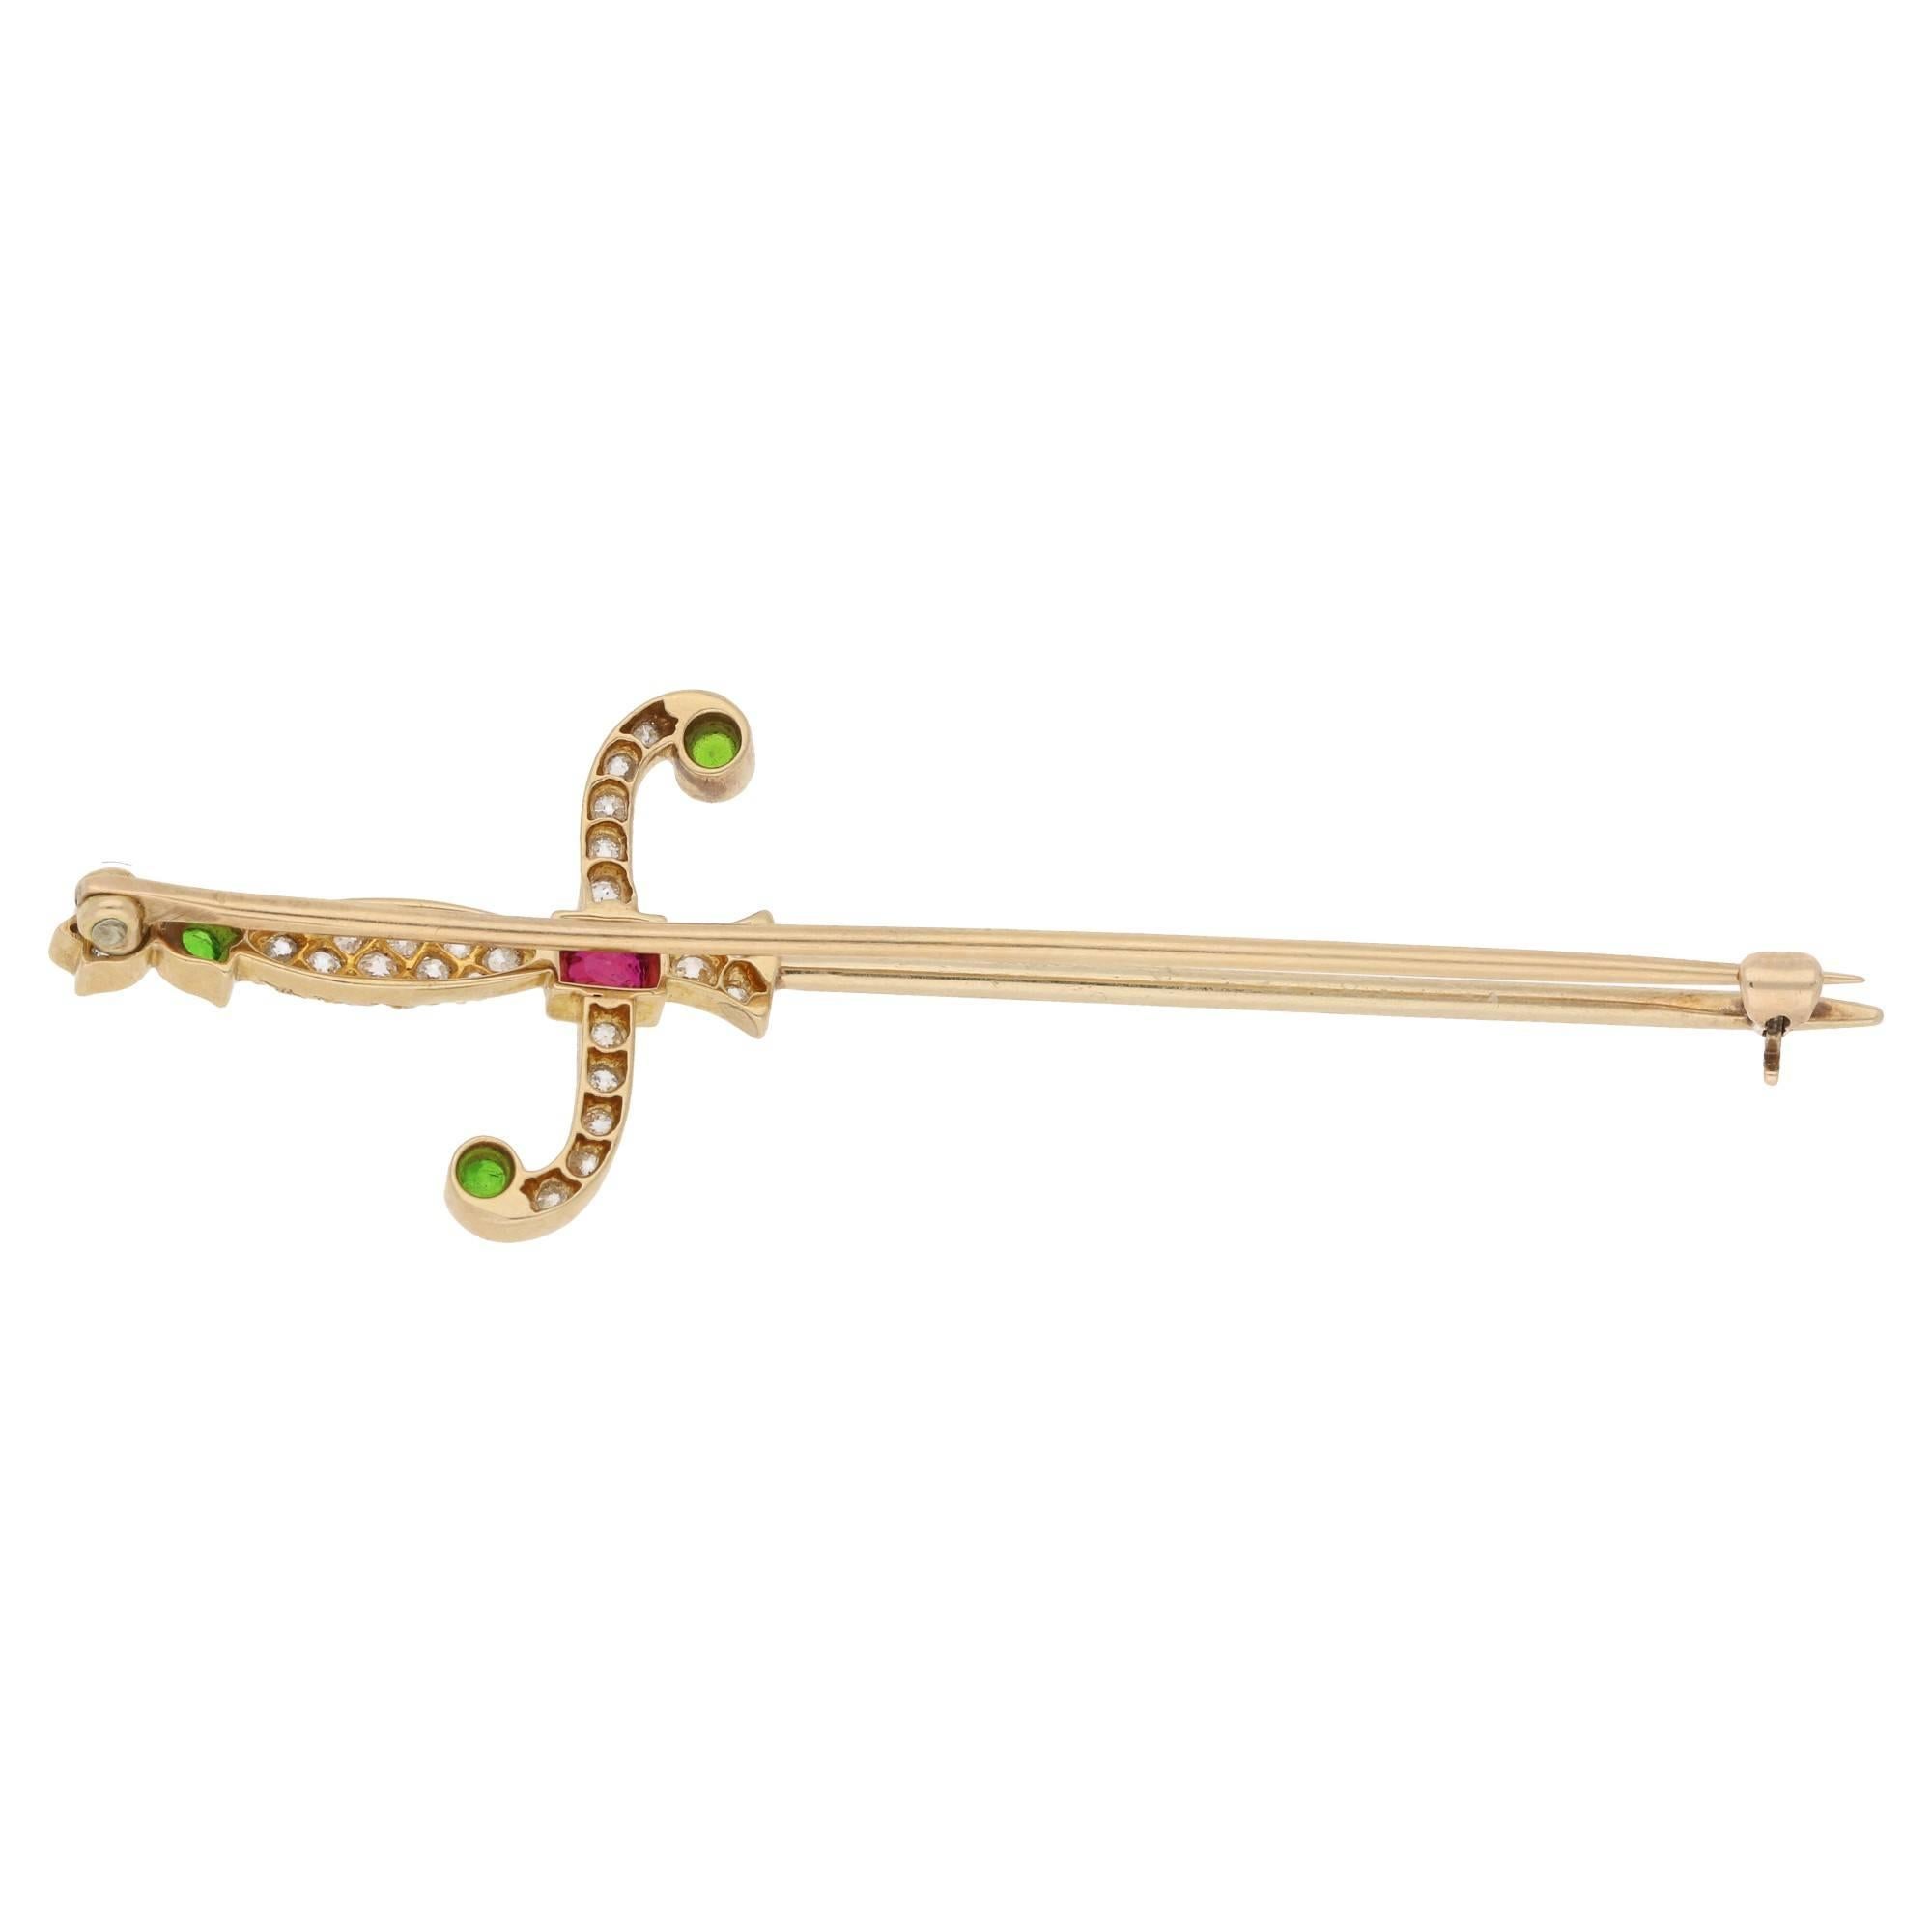 An 18ct yellow gold Edwardian rapier brooch set with diamonds, demantoid garnets and a Burmese ruby. The pommel is set with an Old European cut diamond the head is set with a demantoid garnet, the handle is set with Old European cut diamonds set to